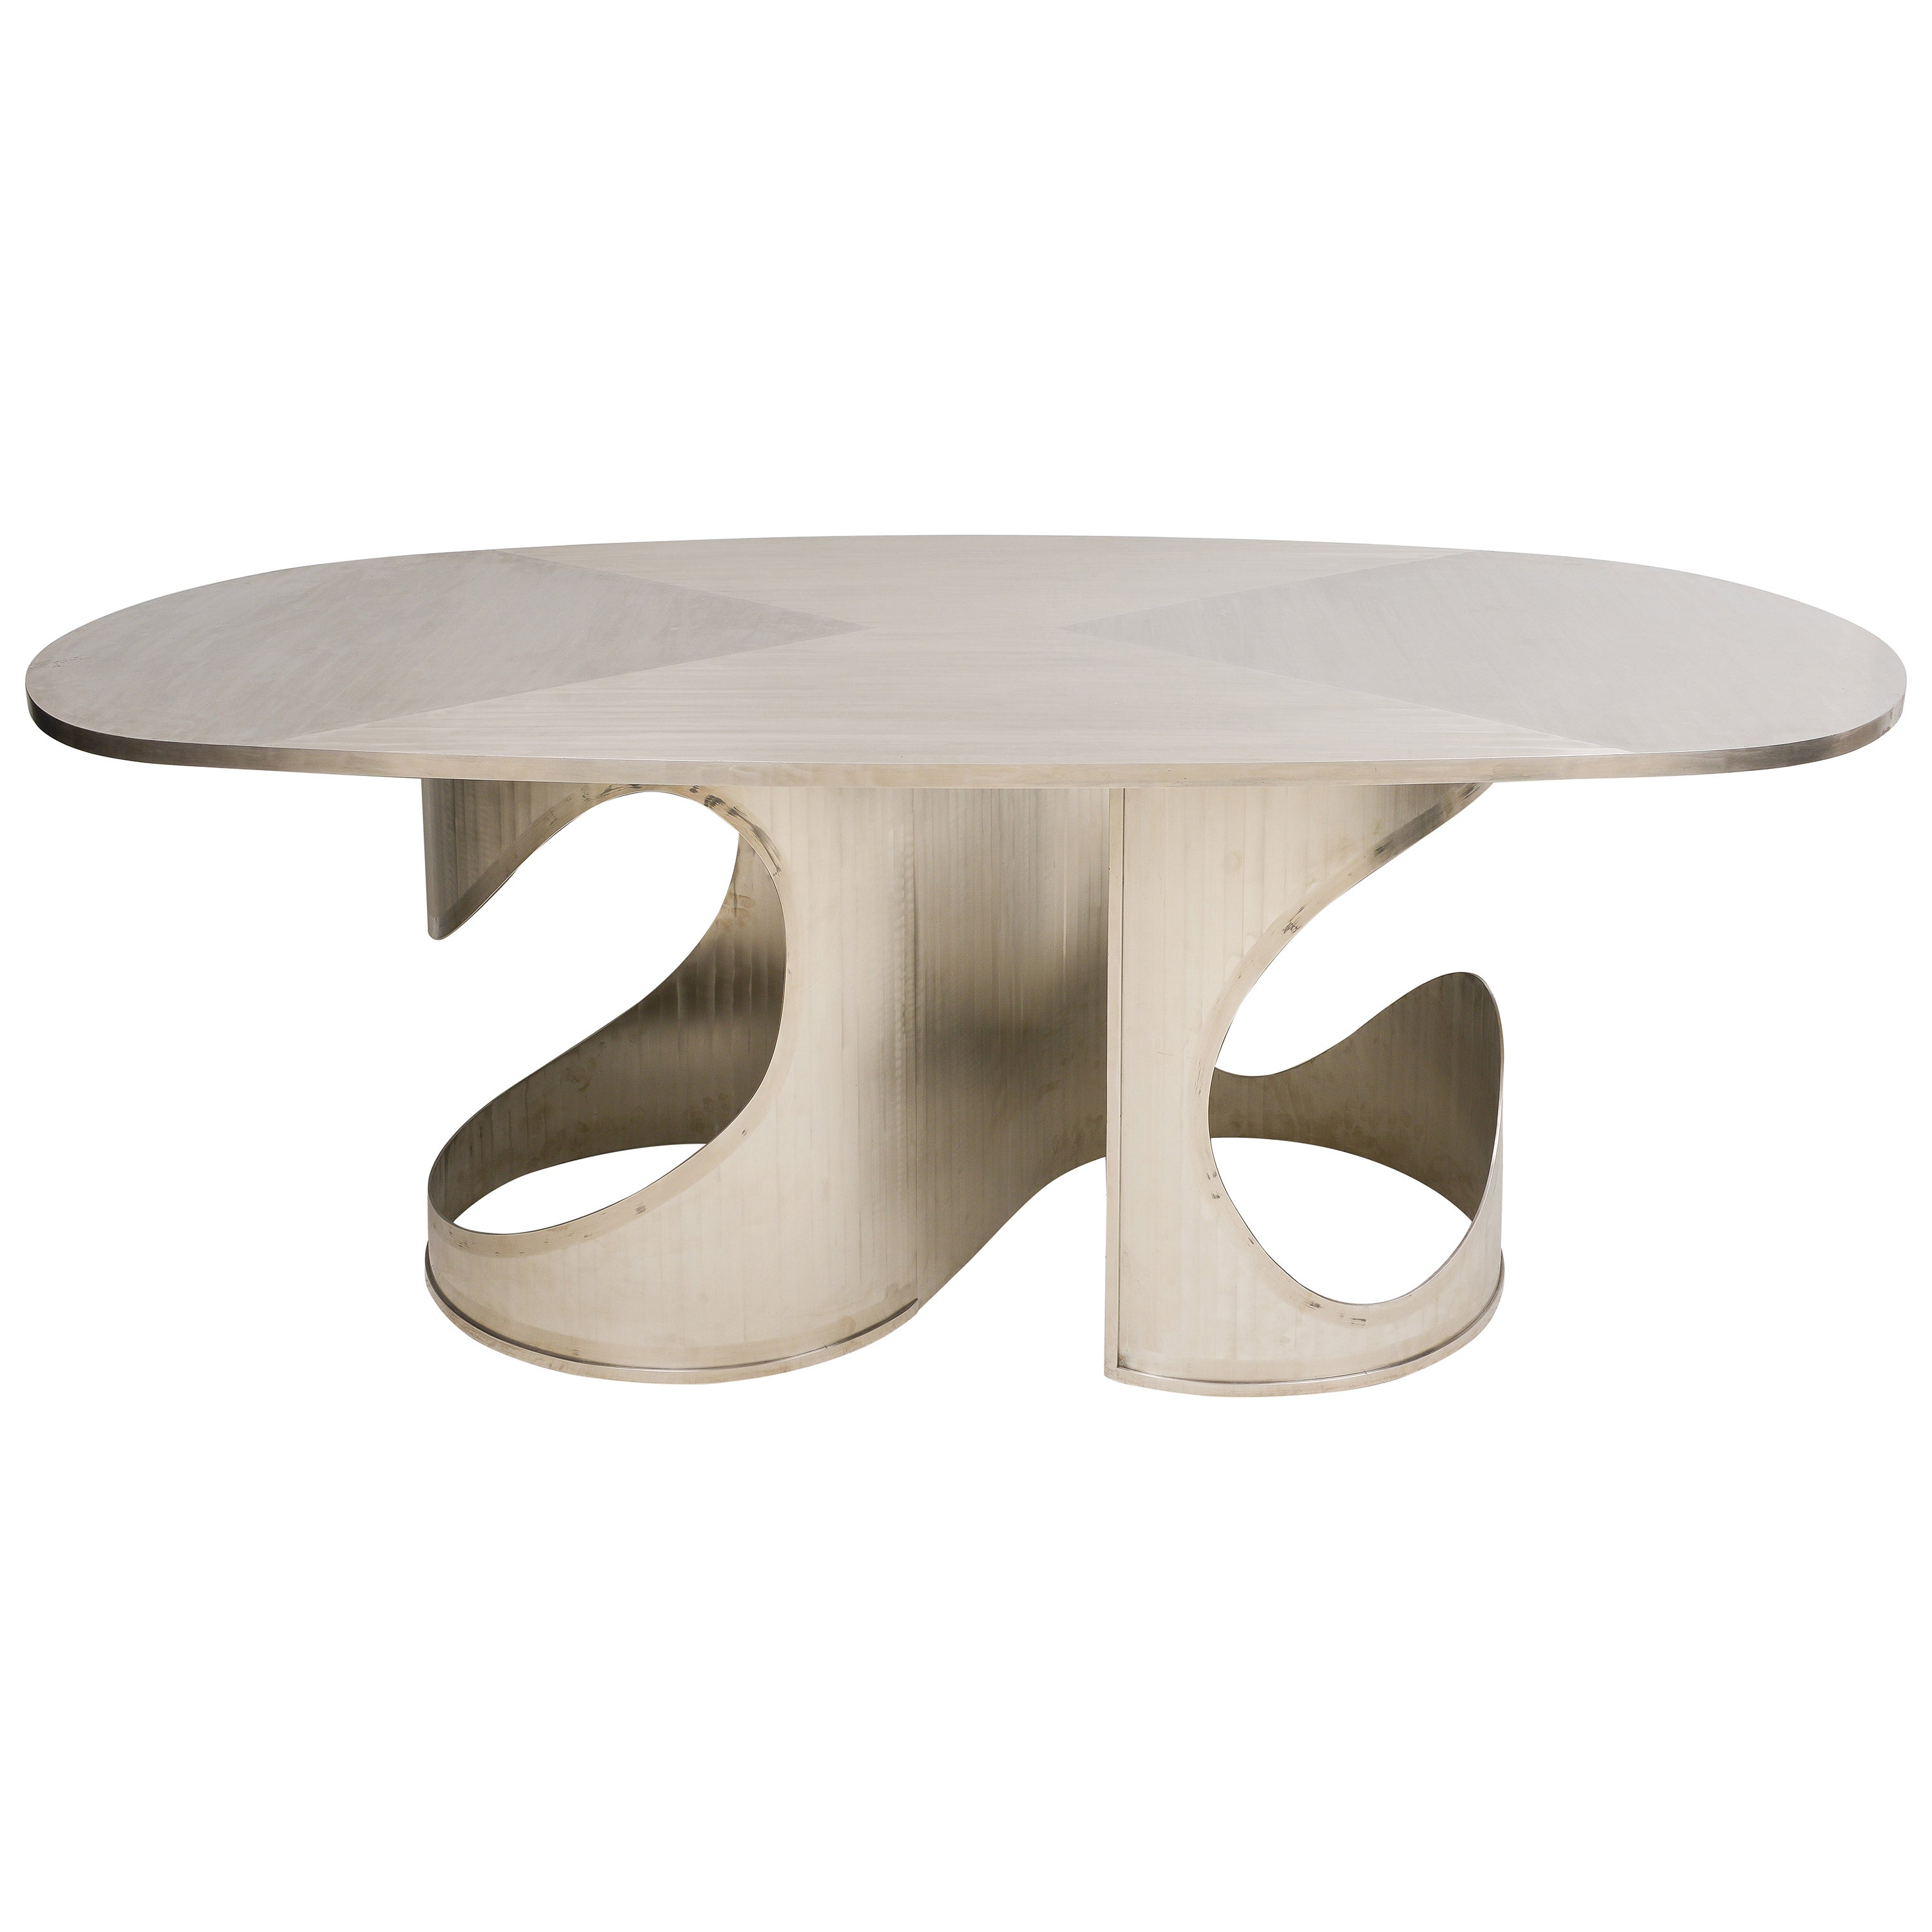 Sculptural Stainless Steel Table in the Manner of Maria Pergay